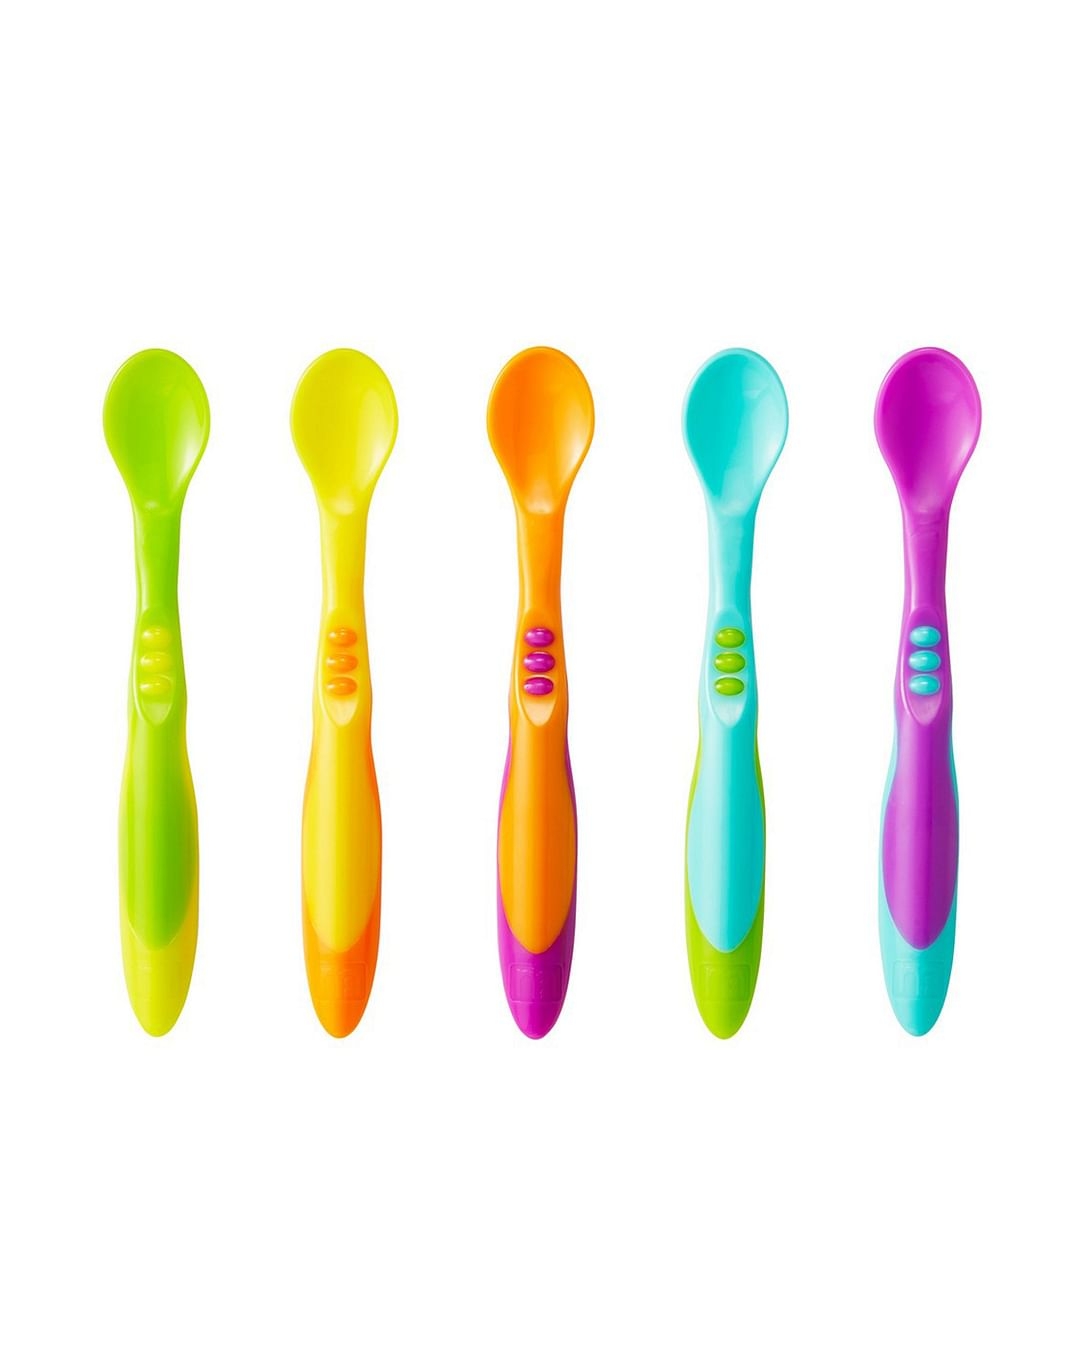 Mothercare | Flexi Tip Spoons - Pack of 5